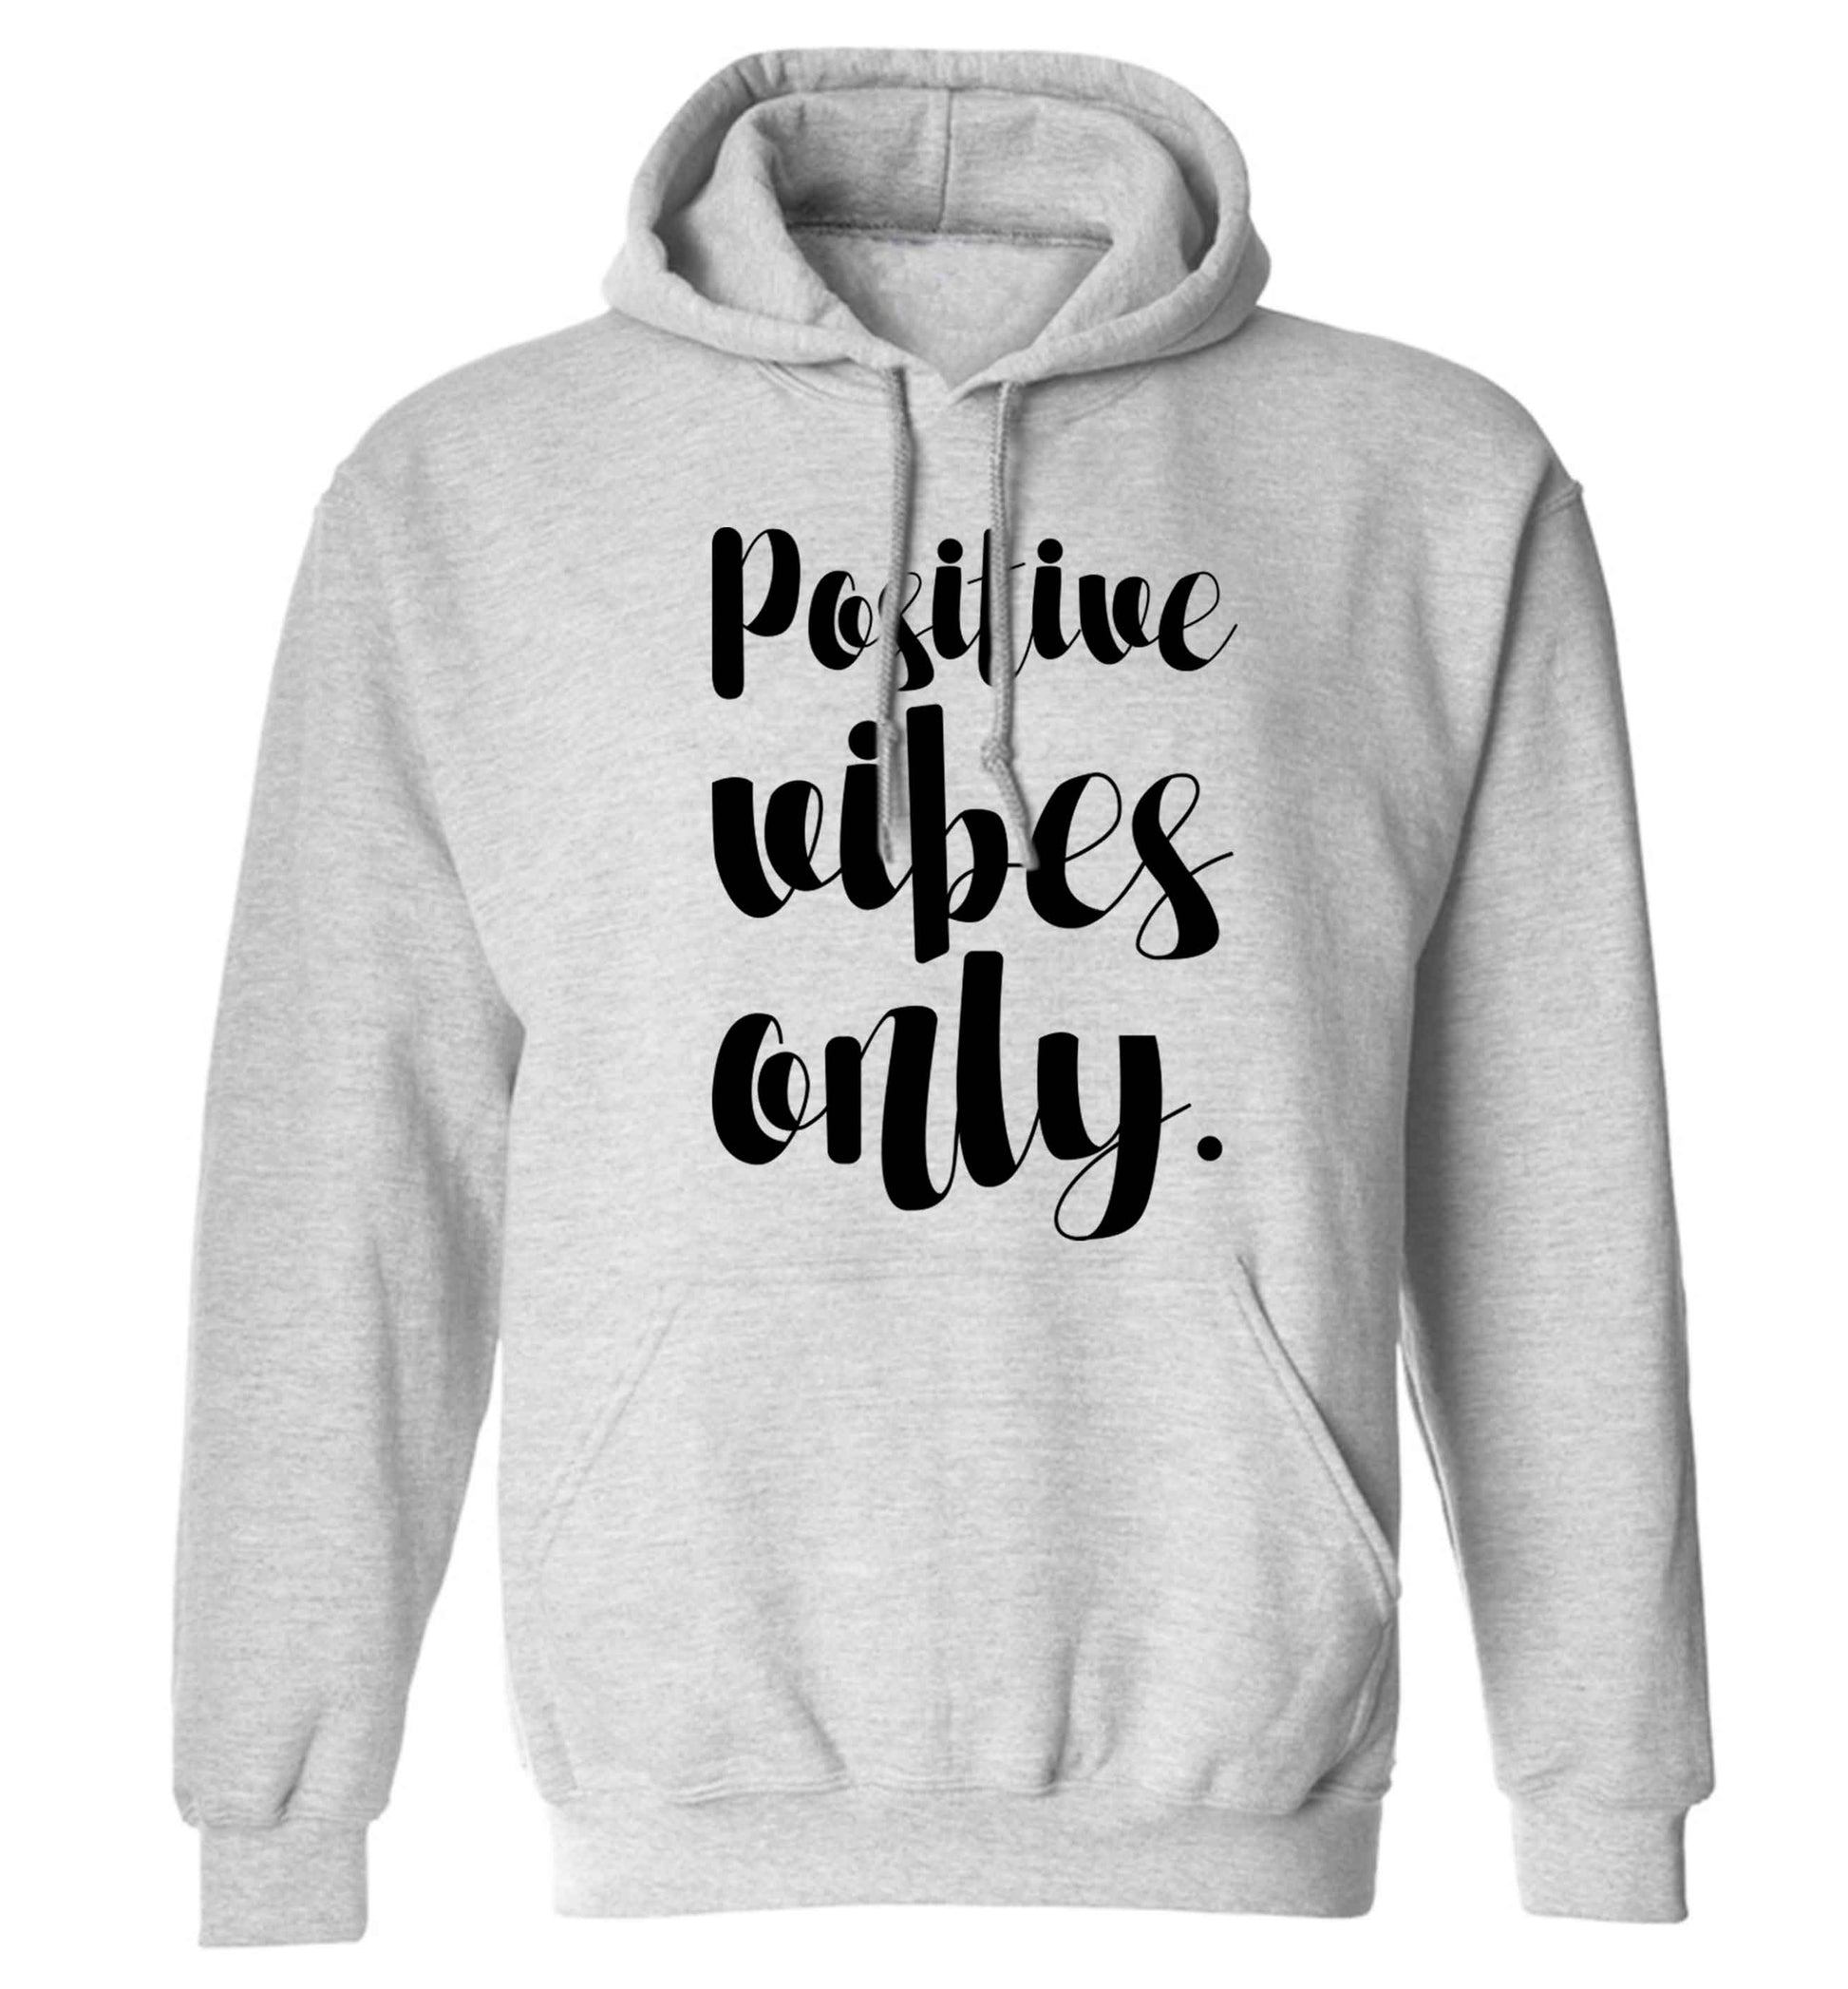 Positive vibes only adults unisex grey hoodie 2XL